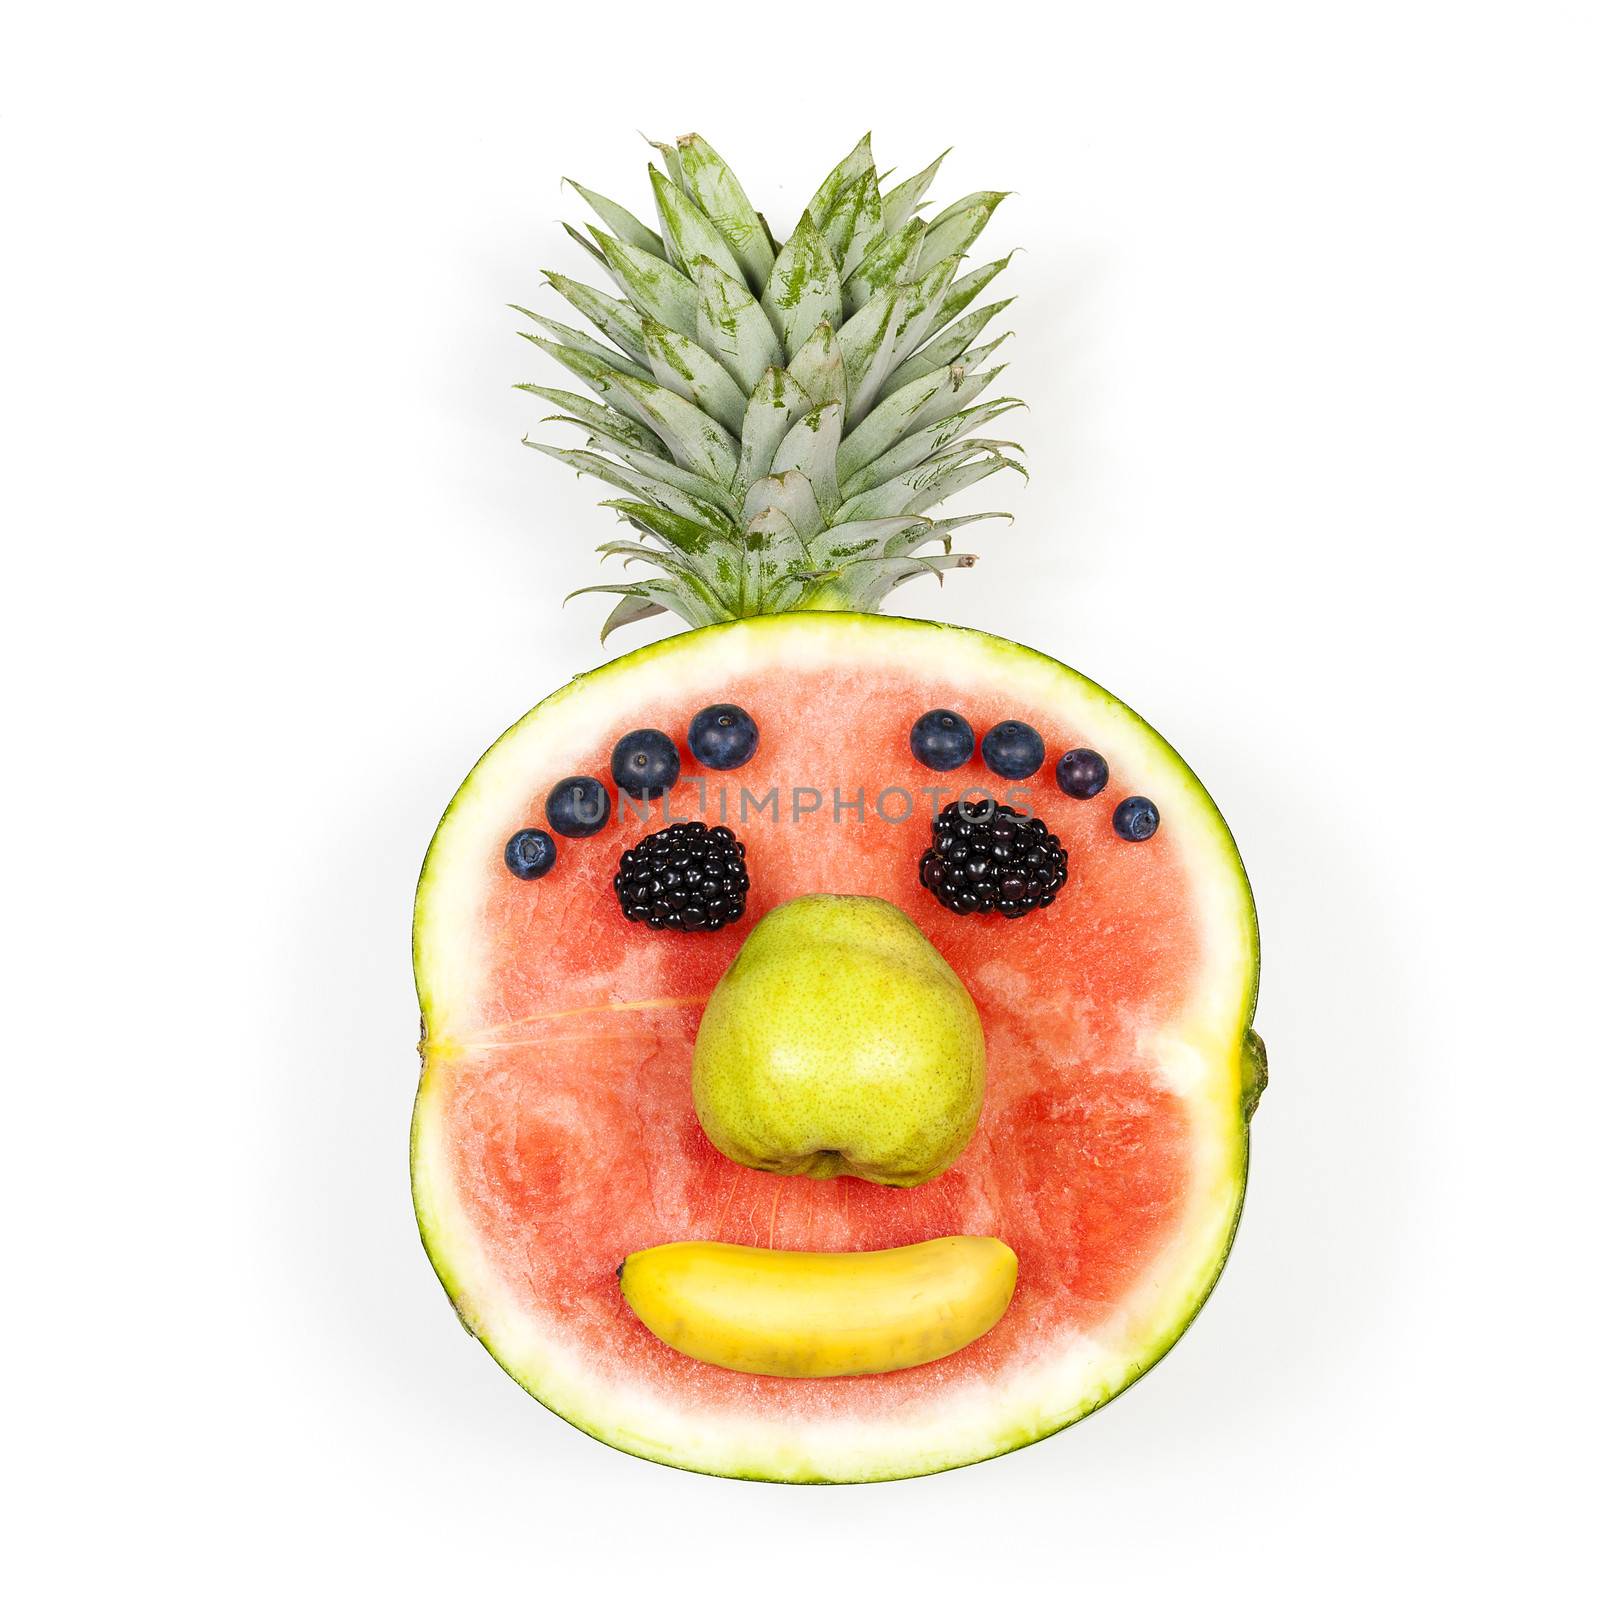 Funny fruit face isolated over white background 